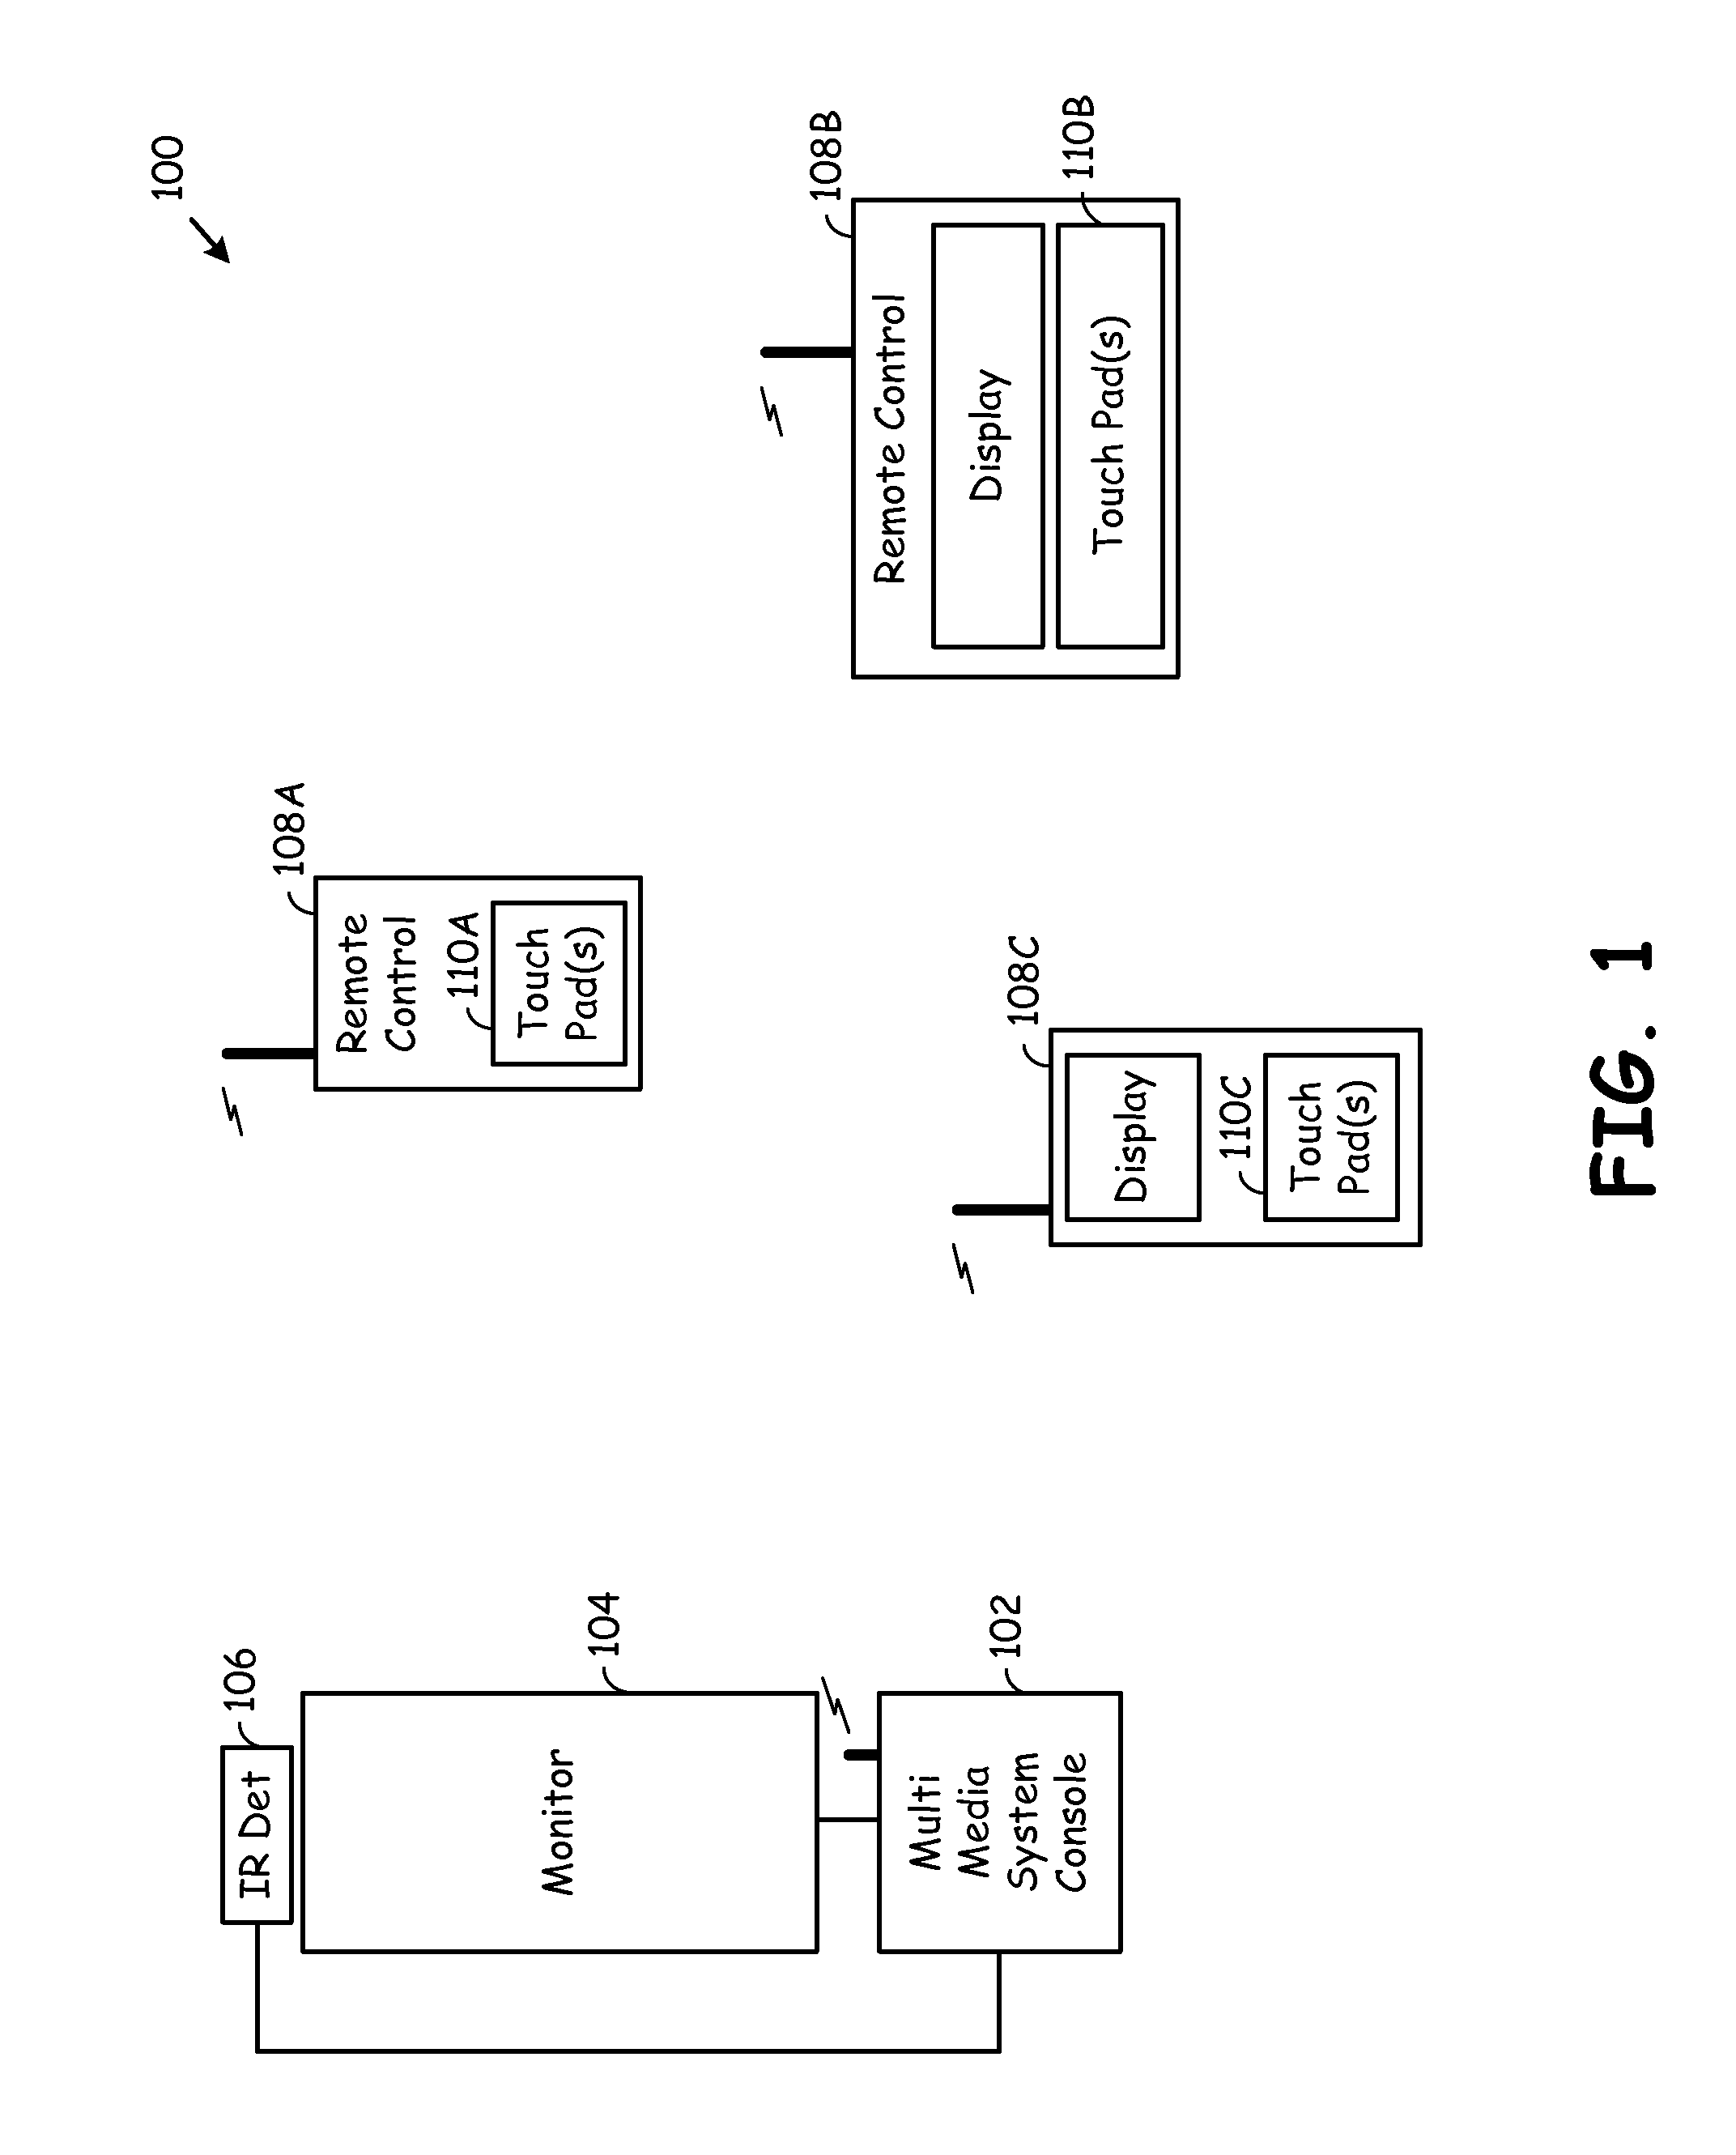 Remote control for multimedia system having touch sensitive panel for user id